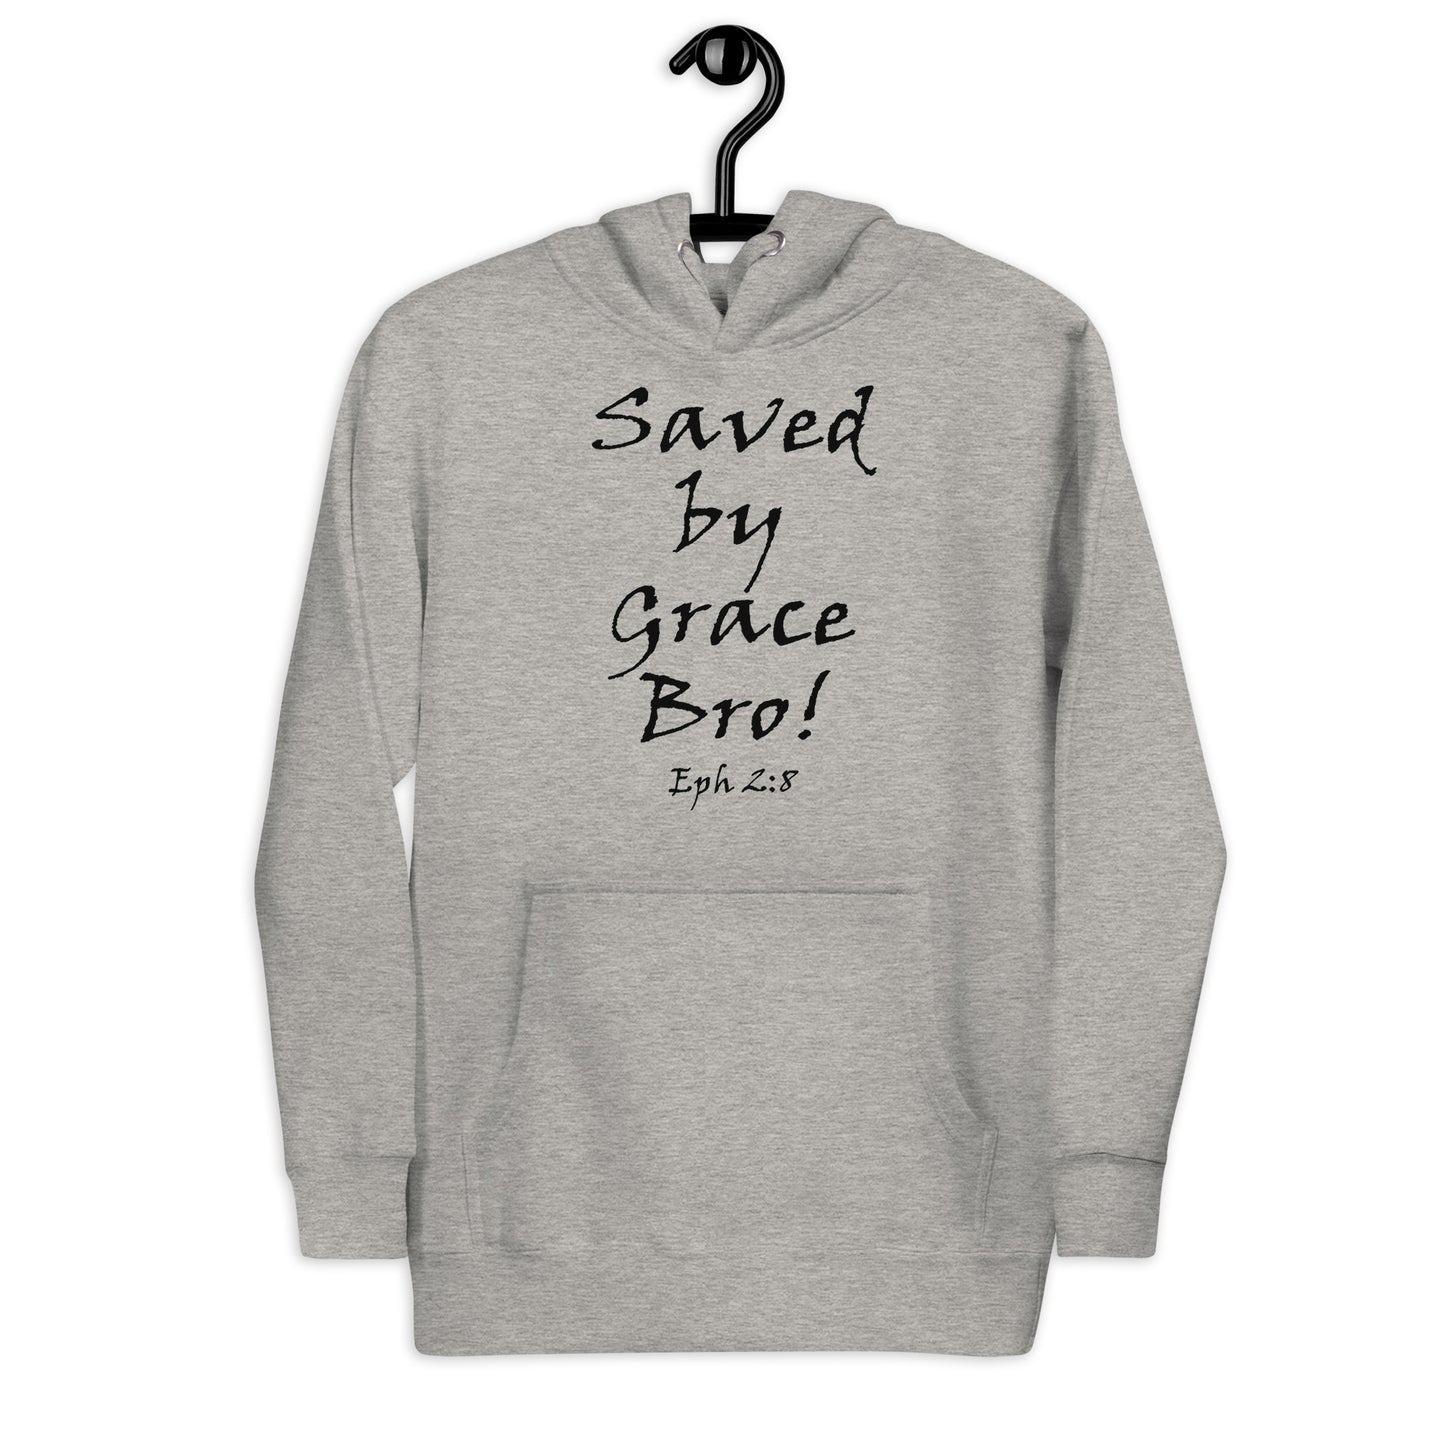 Saved by Grace Bro! Unisex Hoodie - Solid Rock Designs | Christian Apparel